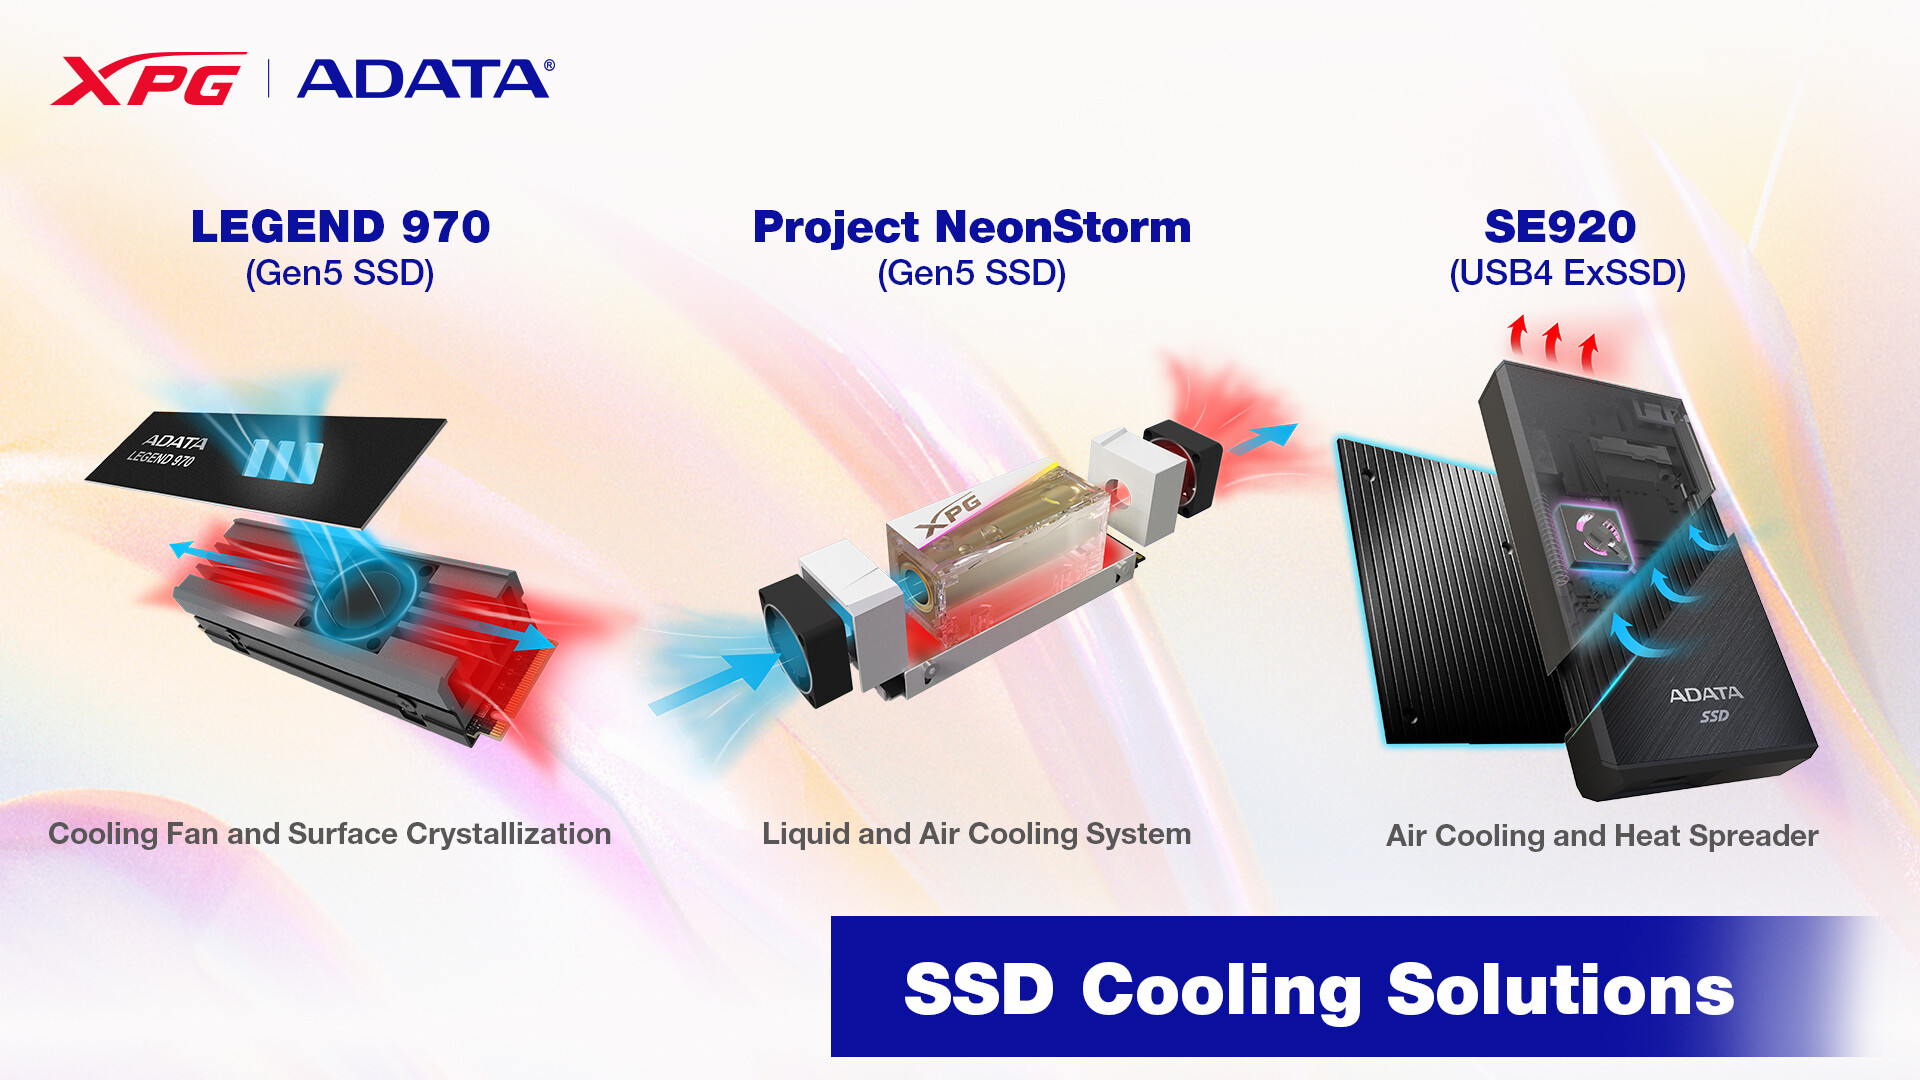 The debut of ADATA's SSD cooling solutions is comprehensive.